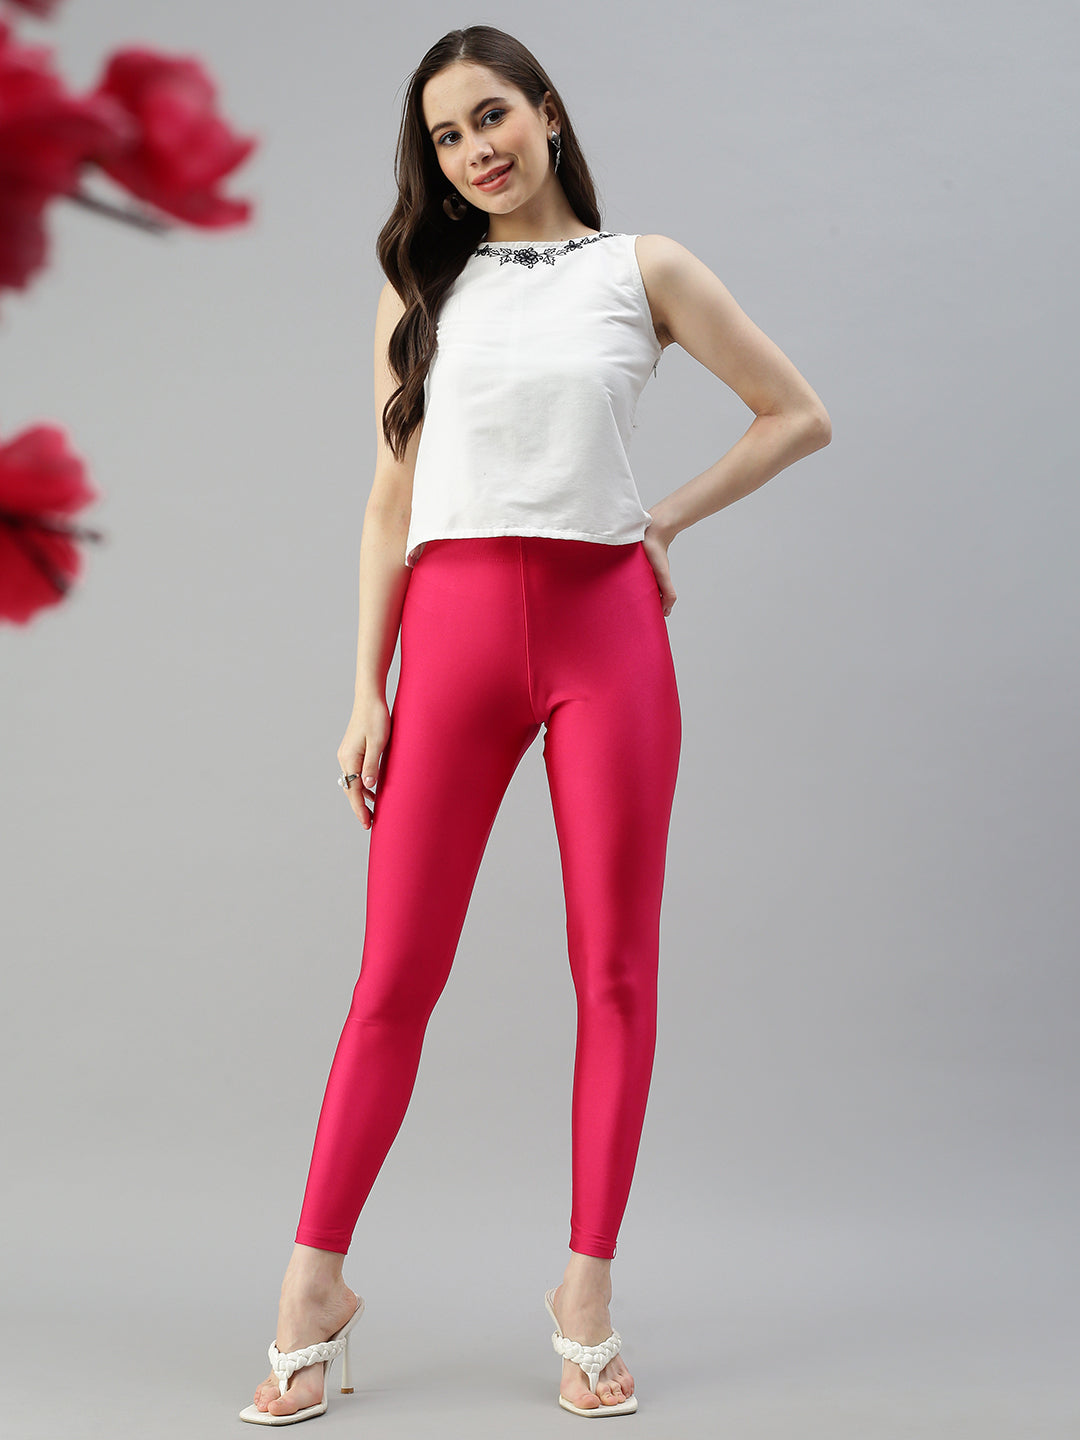 Shop Our Stylish Womens Jeggings with Pockets | Prisma Garments